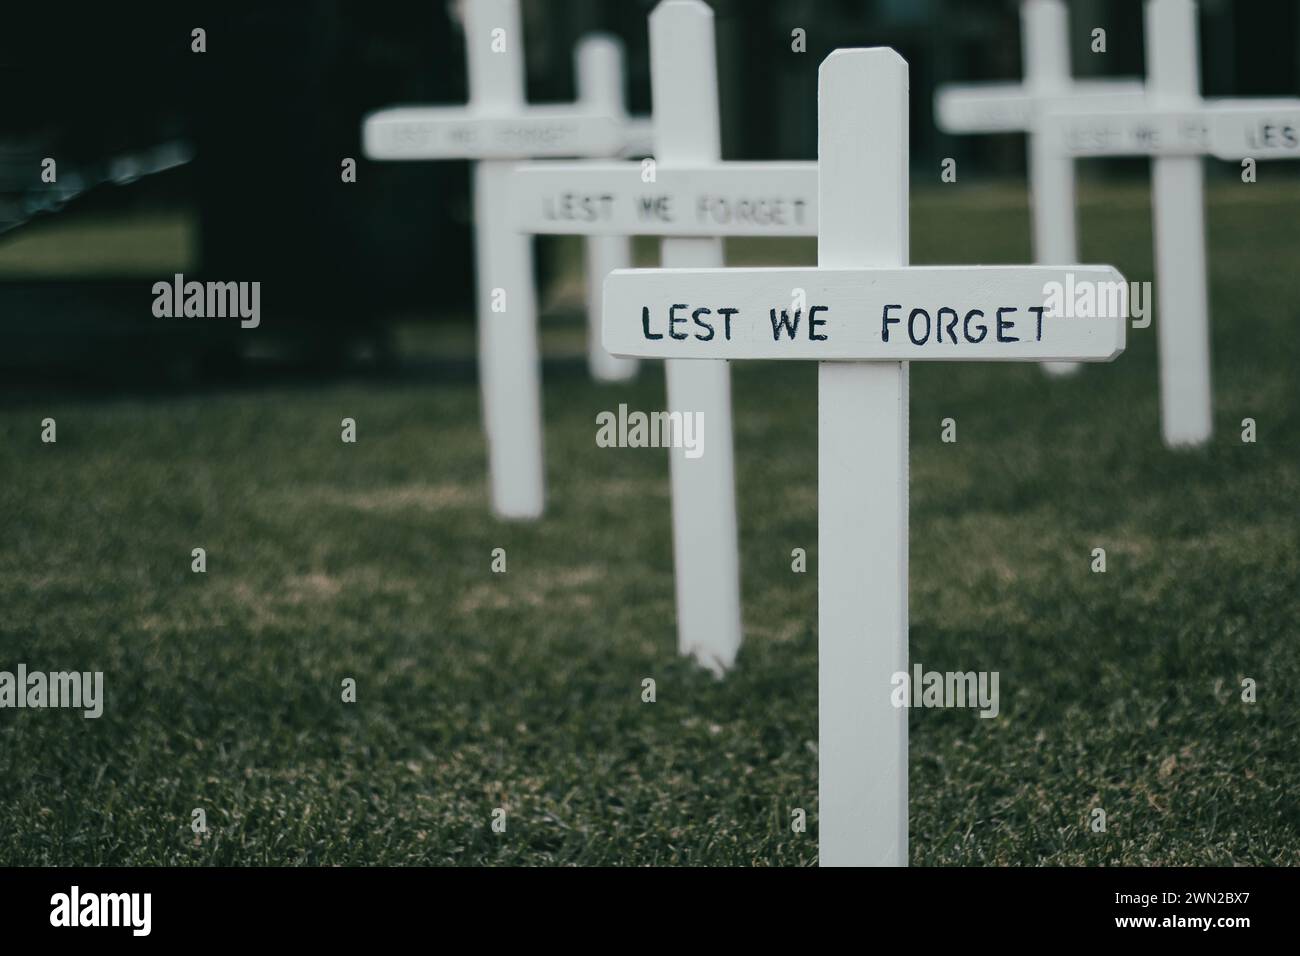 At the going down of the sun and in the morning, we will remember them. Lest We Forget. The Anzac Ode. Stock Photo